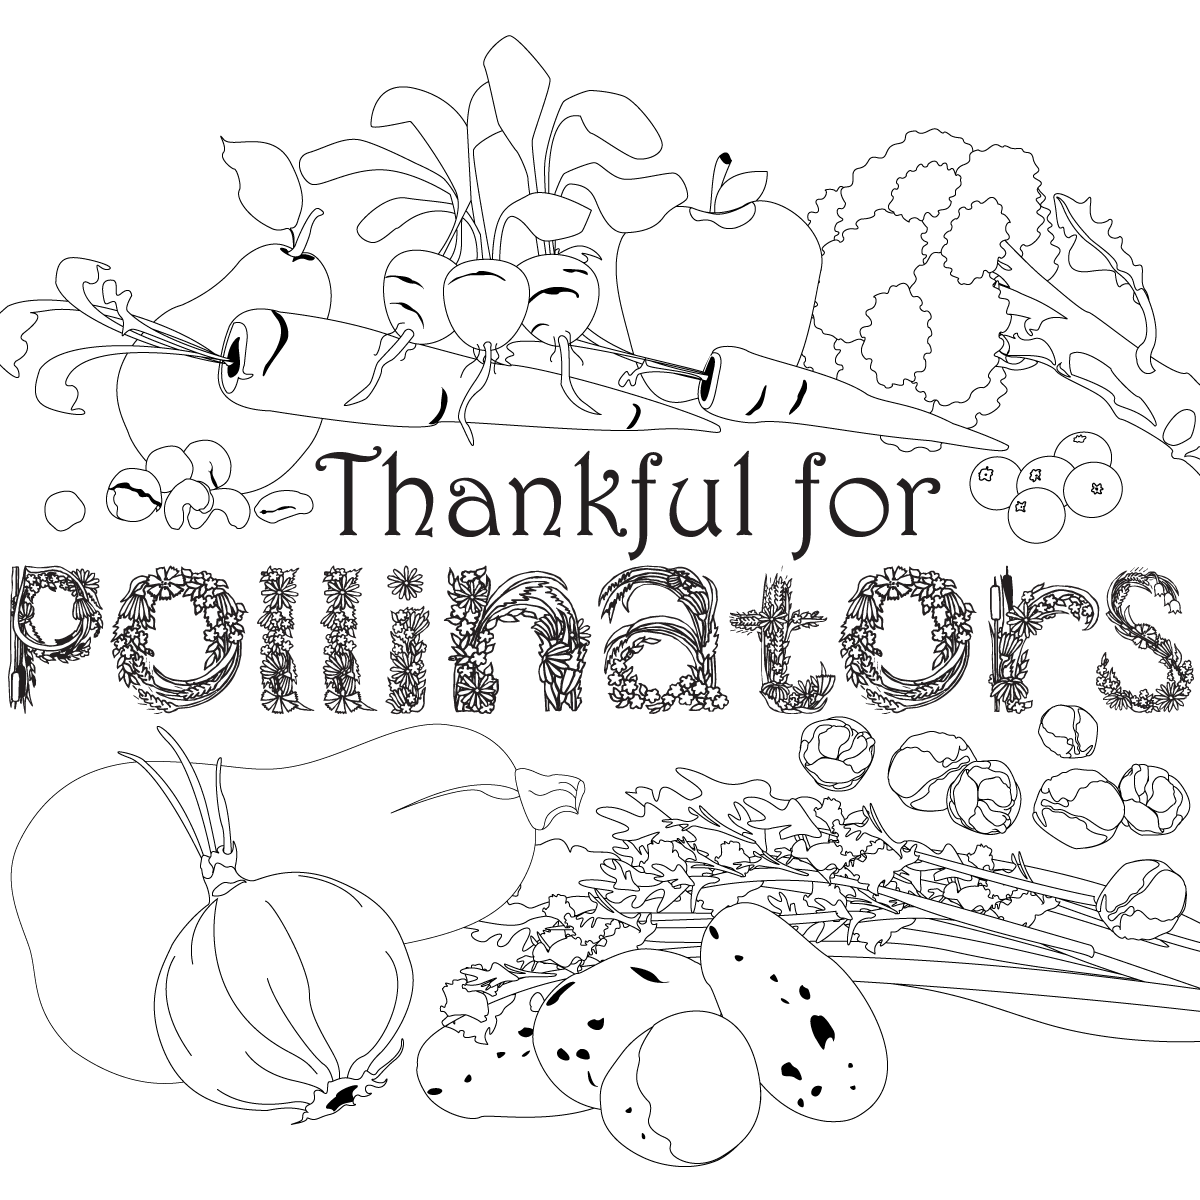 Give thanks for pollinators on Thanksgiving